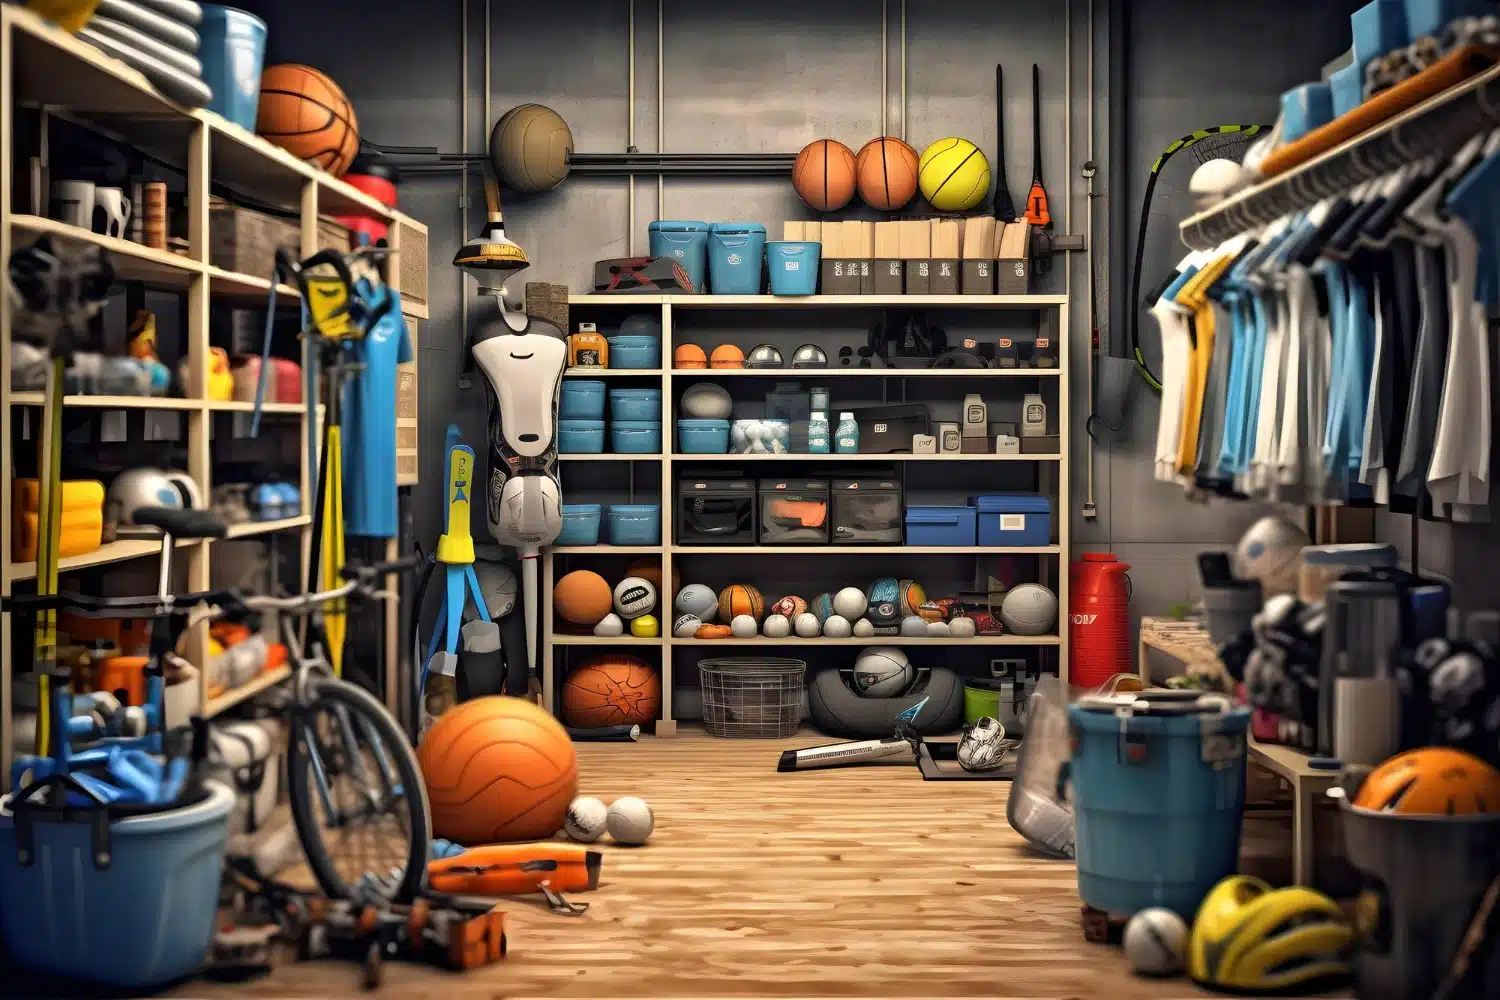 Shop For Sports And Outdoor Gear At DECATHLON DE’s Extensive Collection